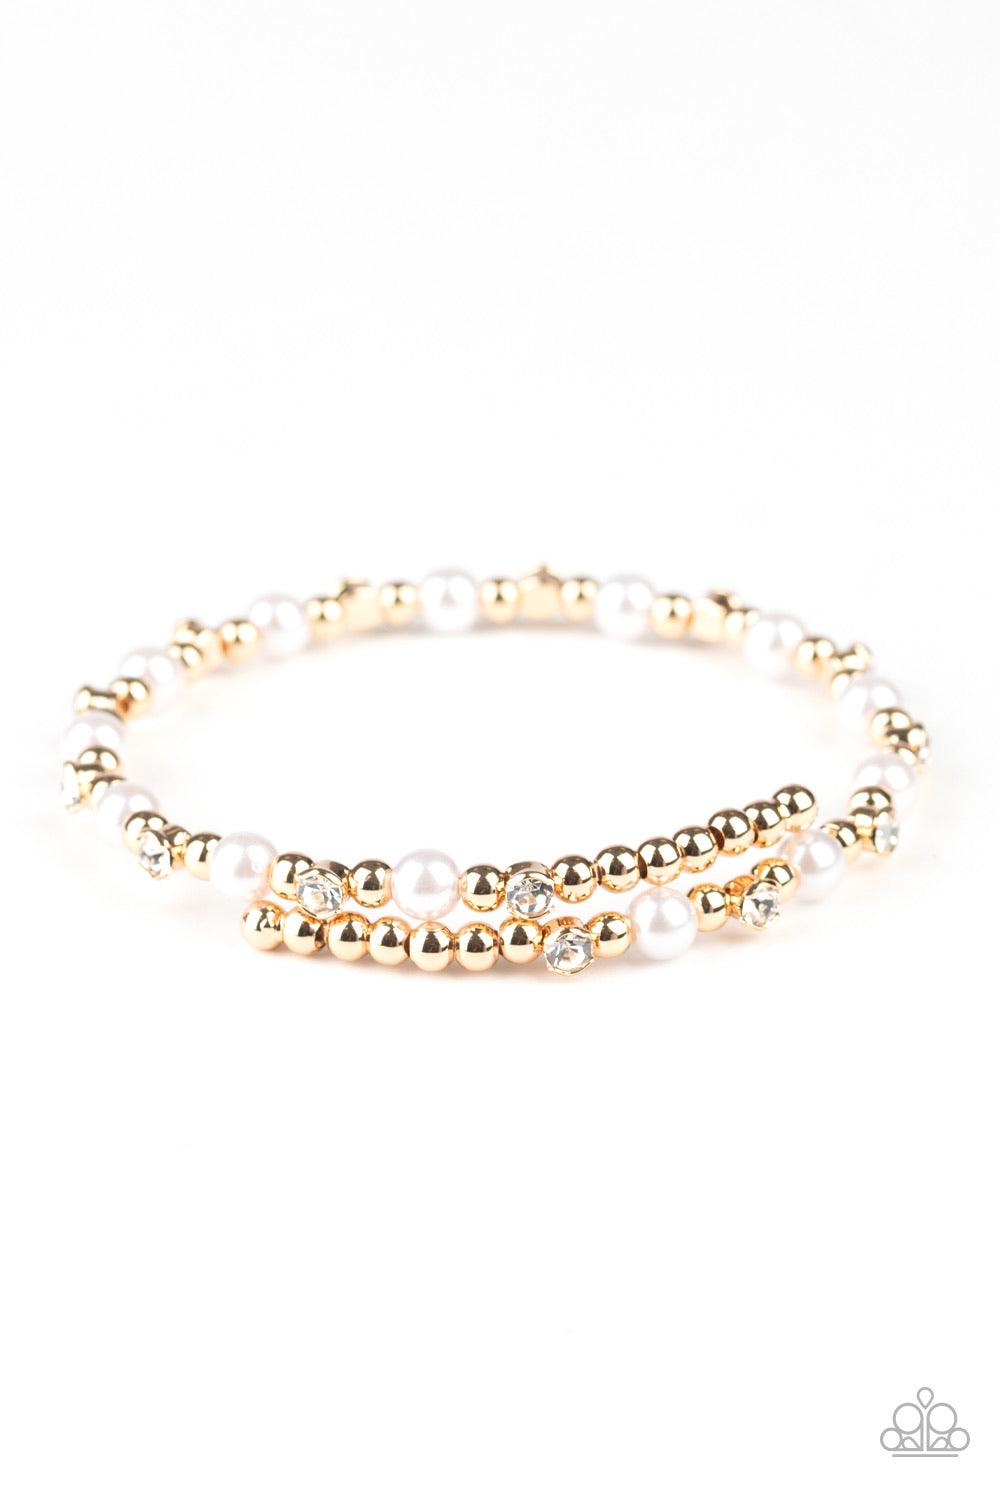 Paparazzi Accessories Decadently Dainty -Gold A collection of shiny gold beads, white pearls, and dainty white rhinestones are threaded along a dainty wire around the wrist for a timeless look. Sold as one individual bracelet. Jewelry